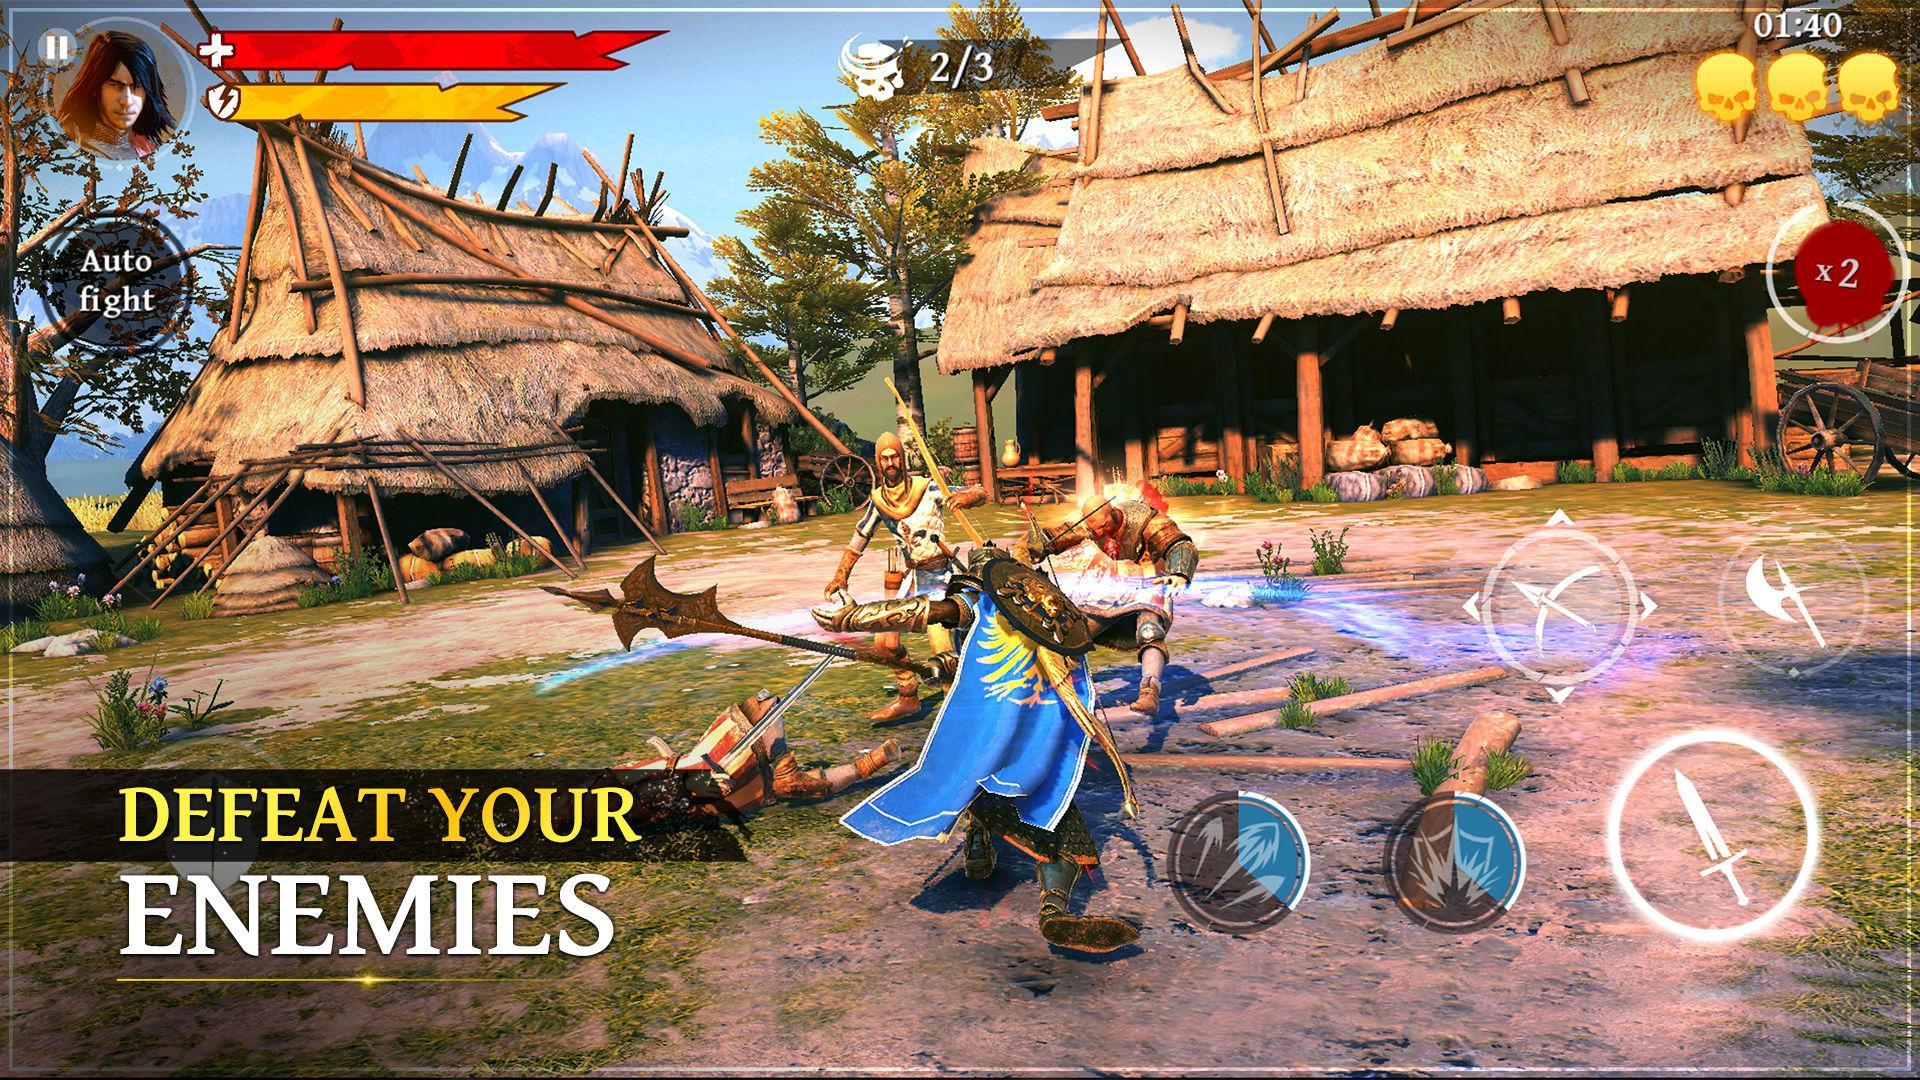 Iron Blade for Android - APK Download